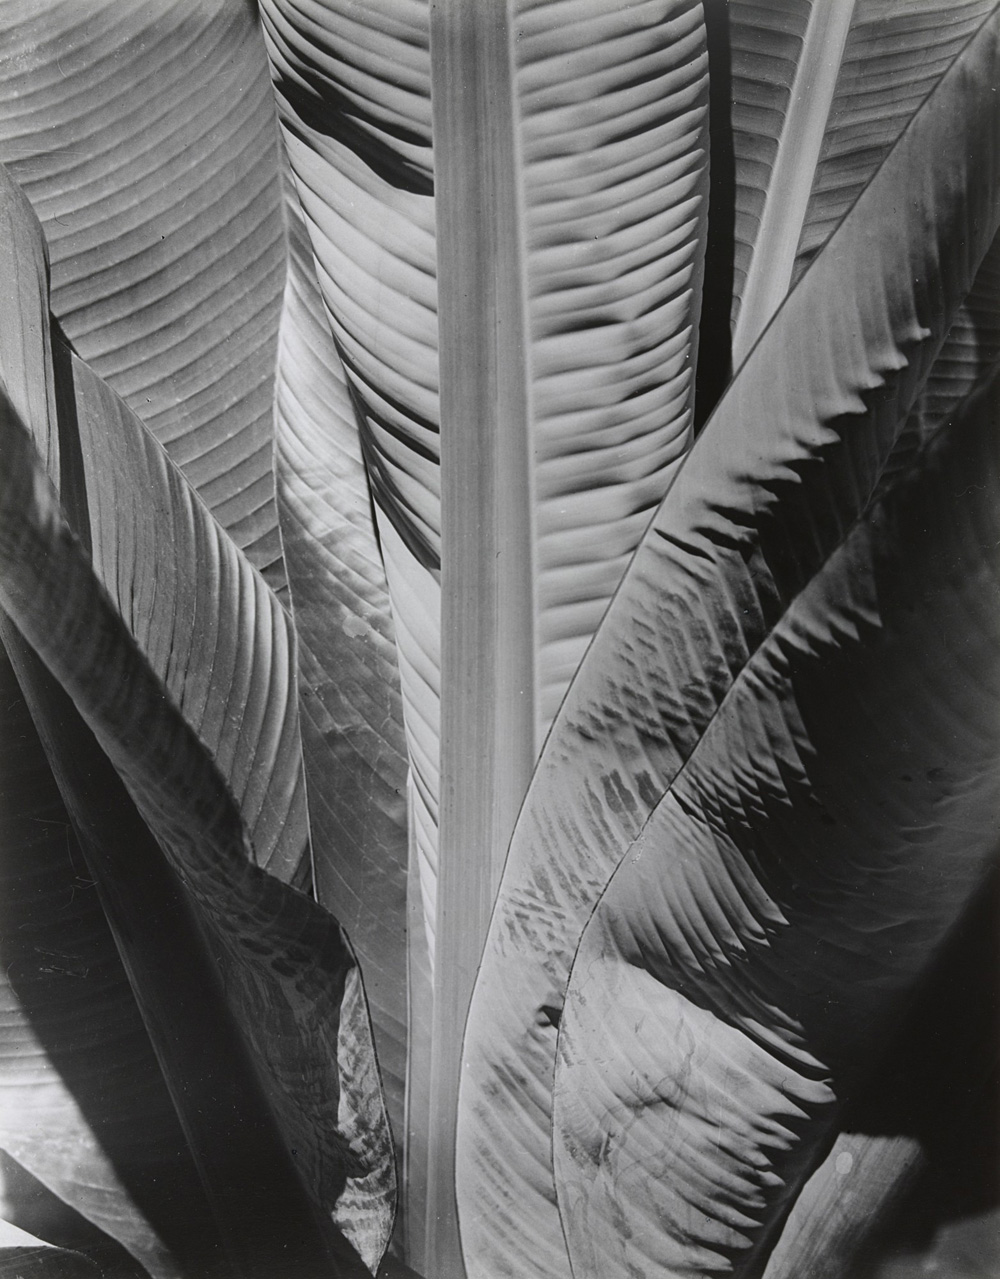 Imogen Cunningham, Banana Tree, 1929, signed gelatin silver print, 14 x 11 inches, price on request